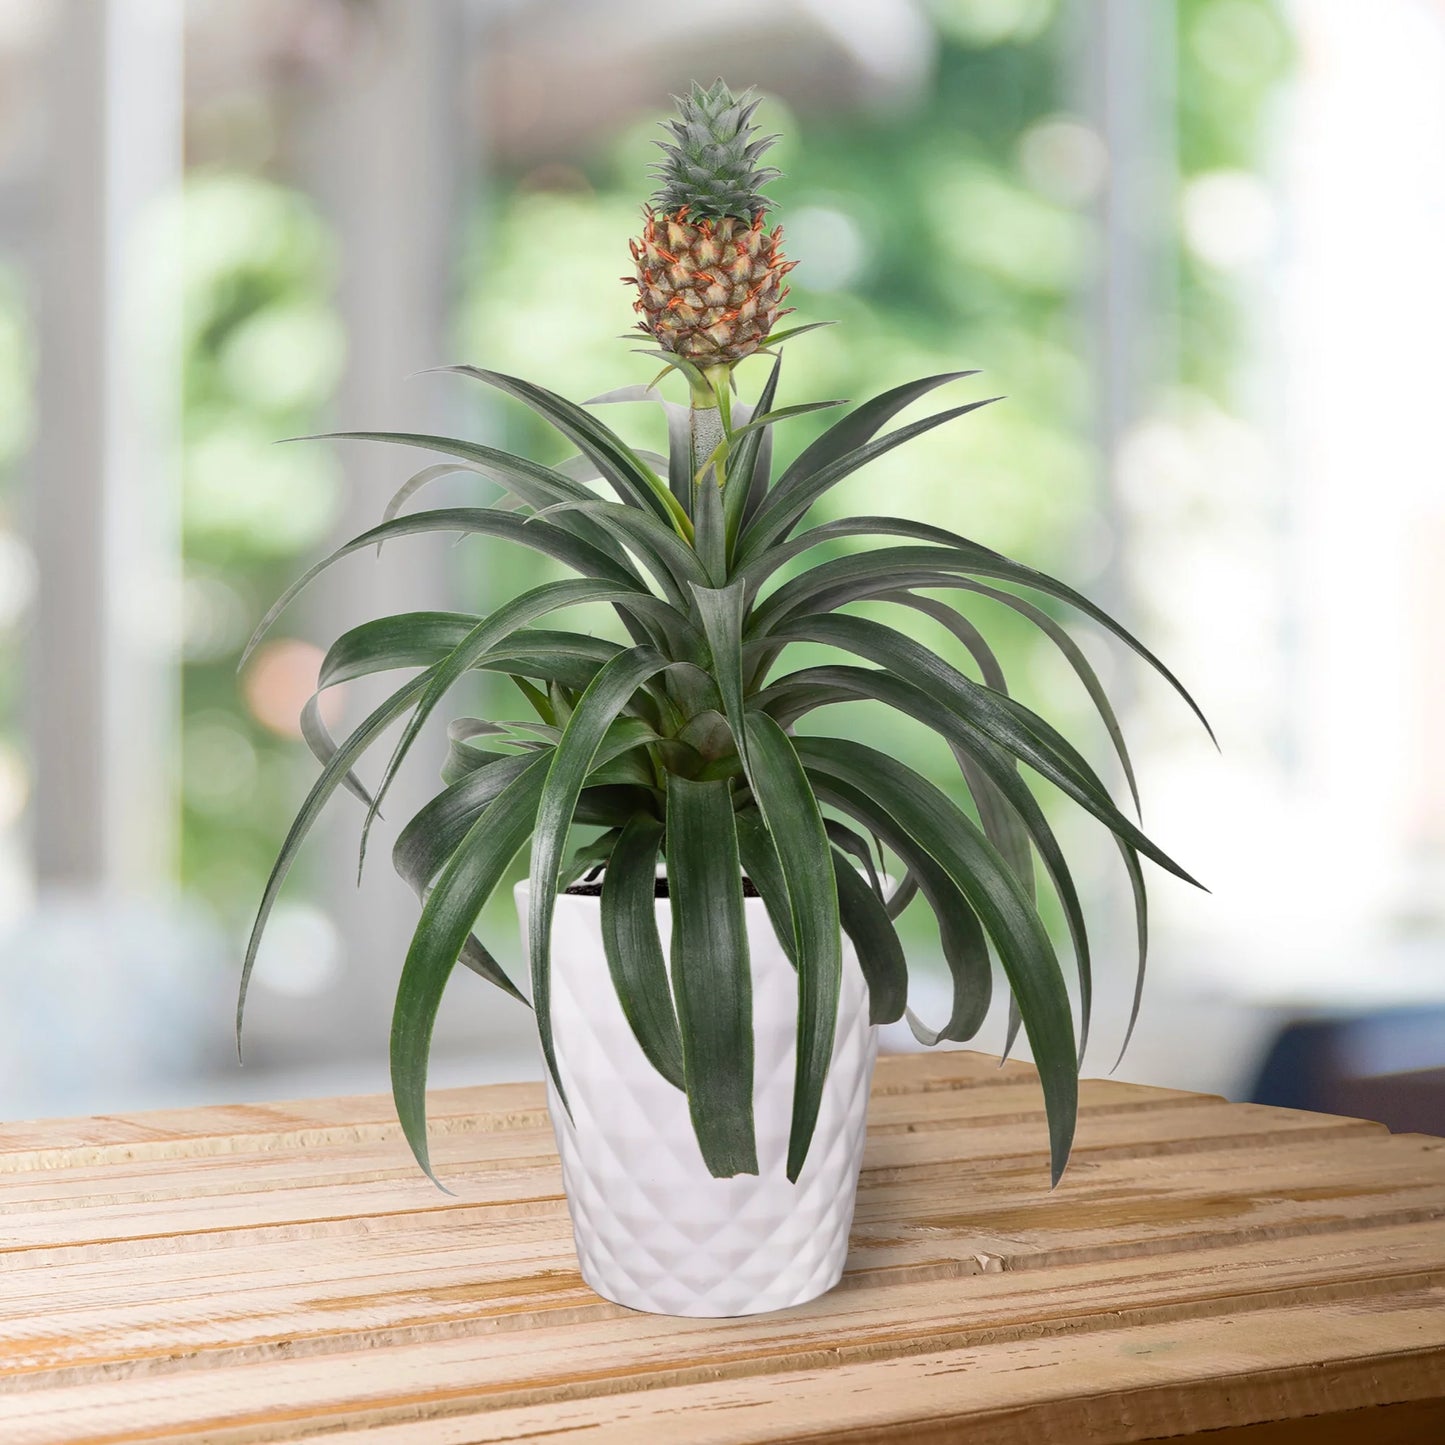 13" Tall Pineapple Bromeliad Plant in 5" White Ceramic Pot, House Plant